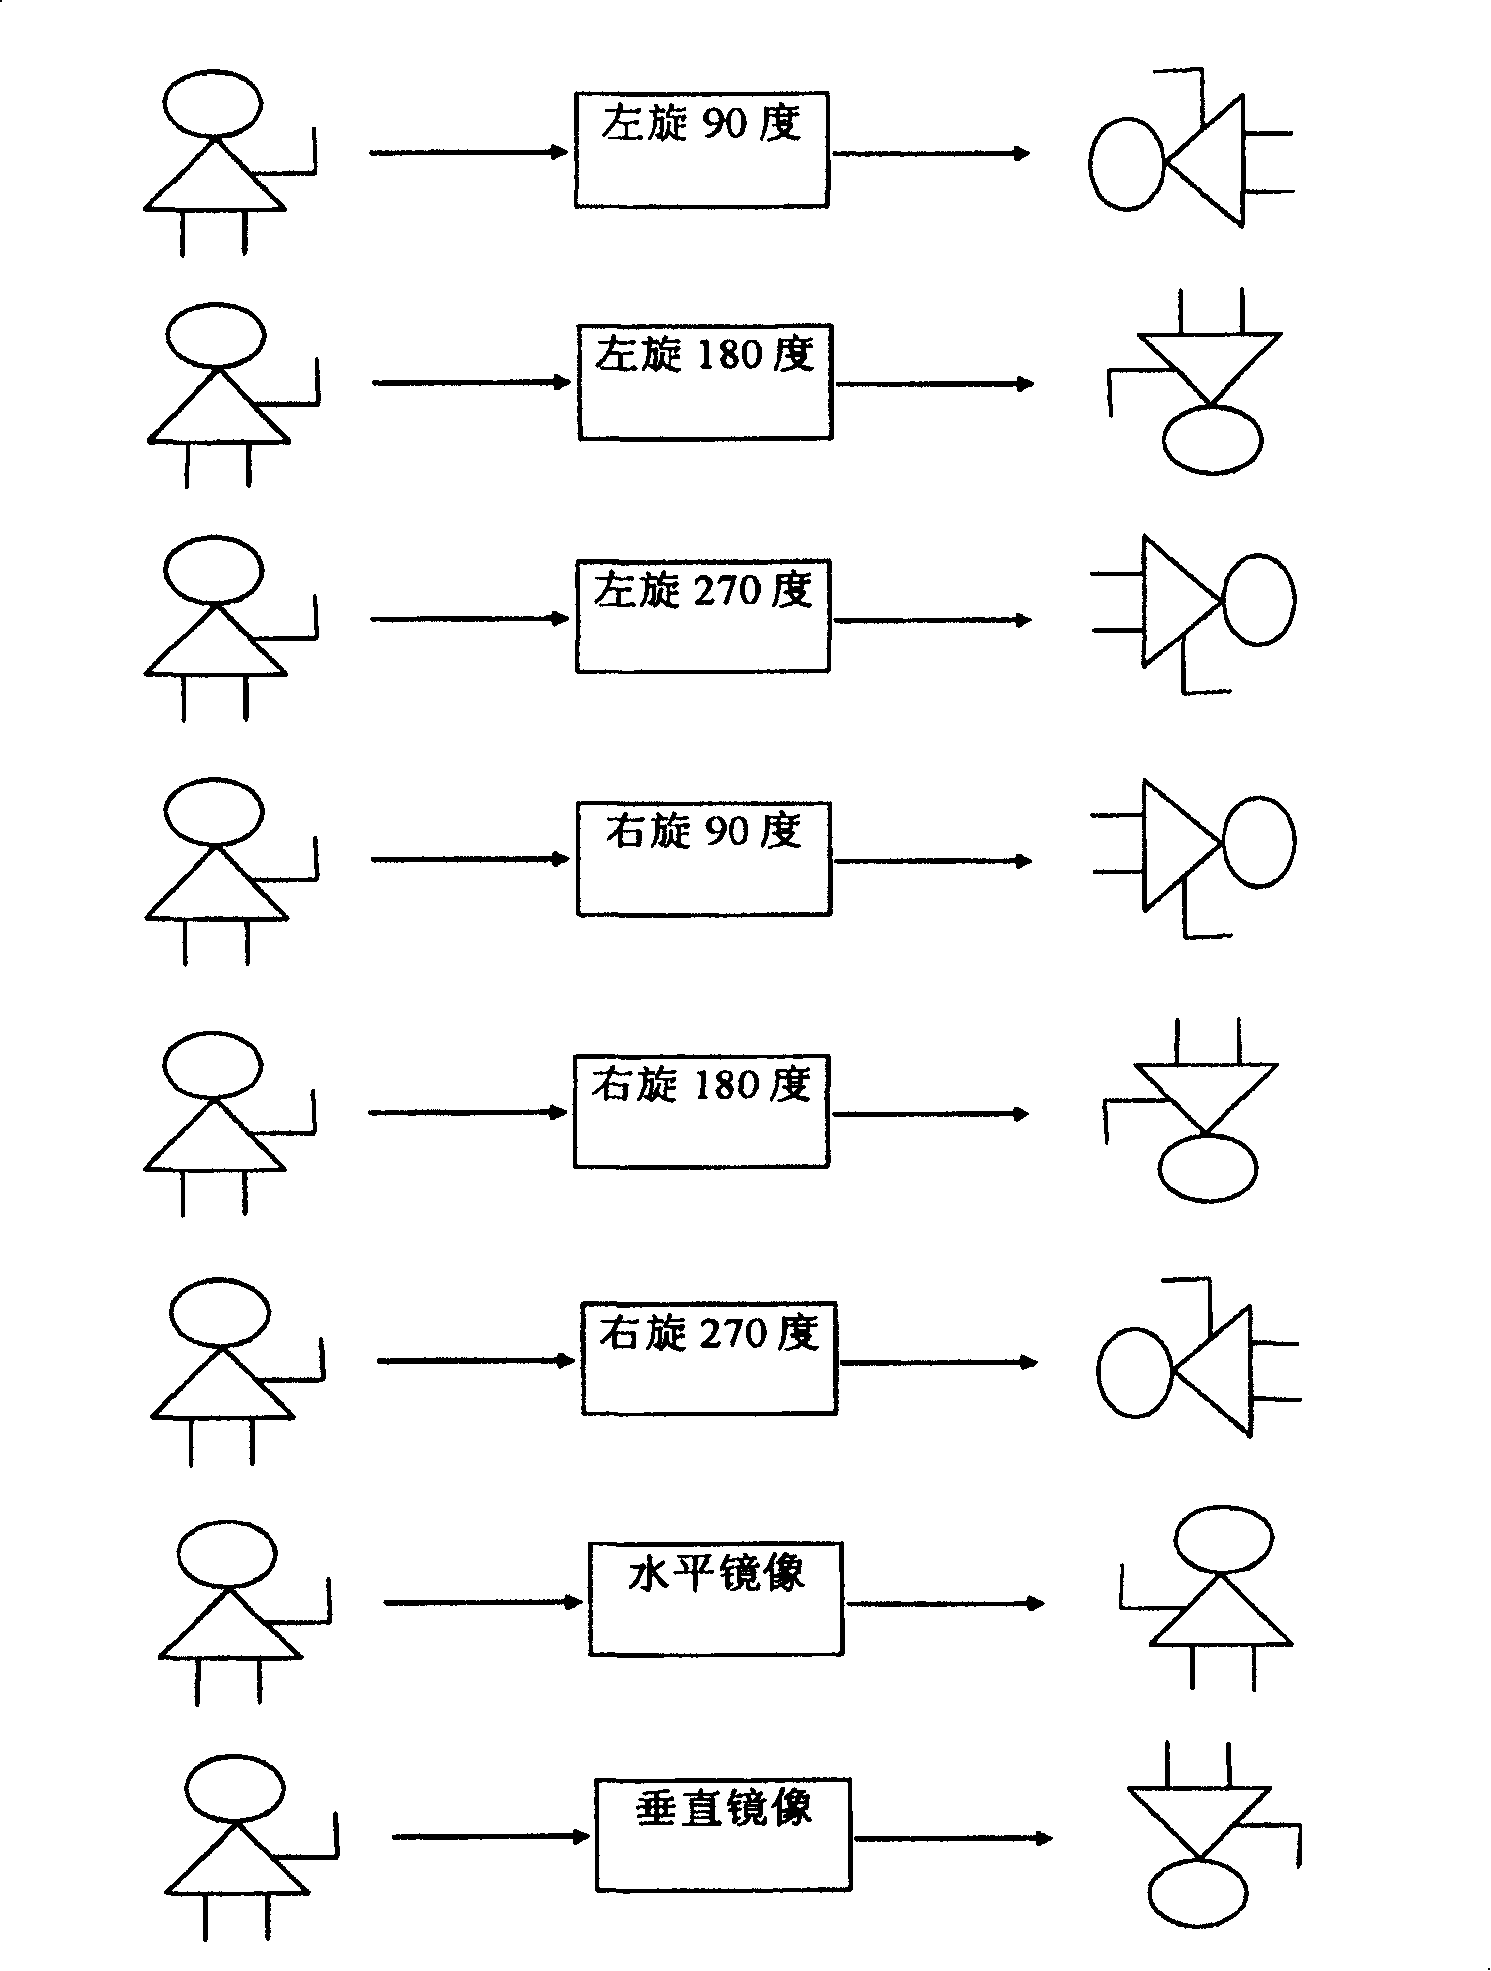 Equipment and method for performing geometric transformation in video rendition